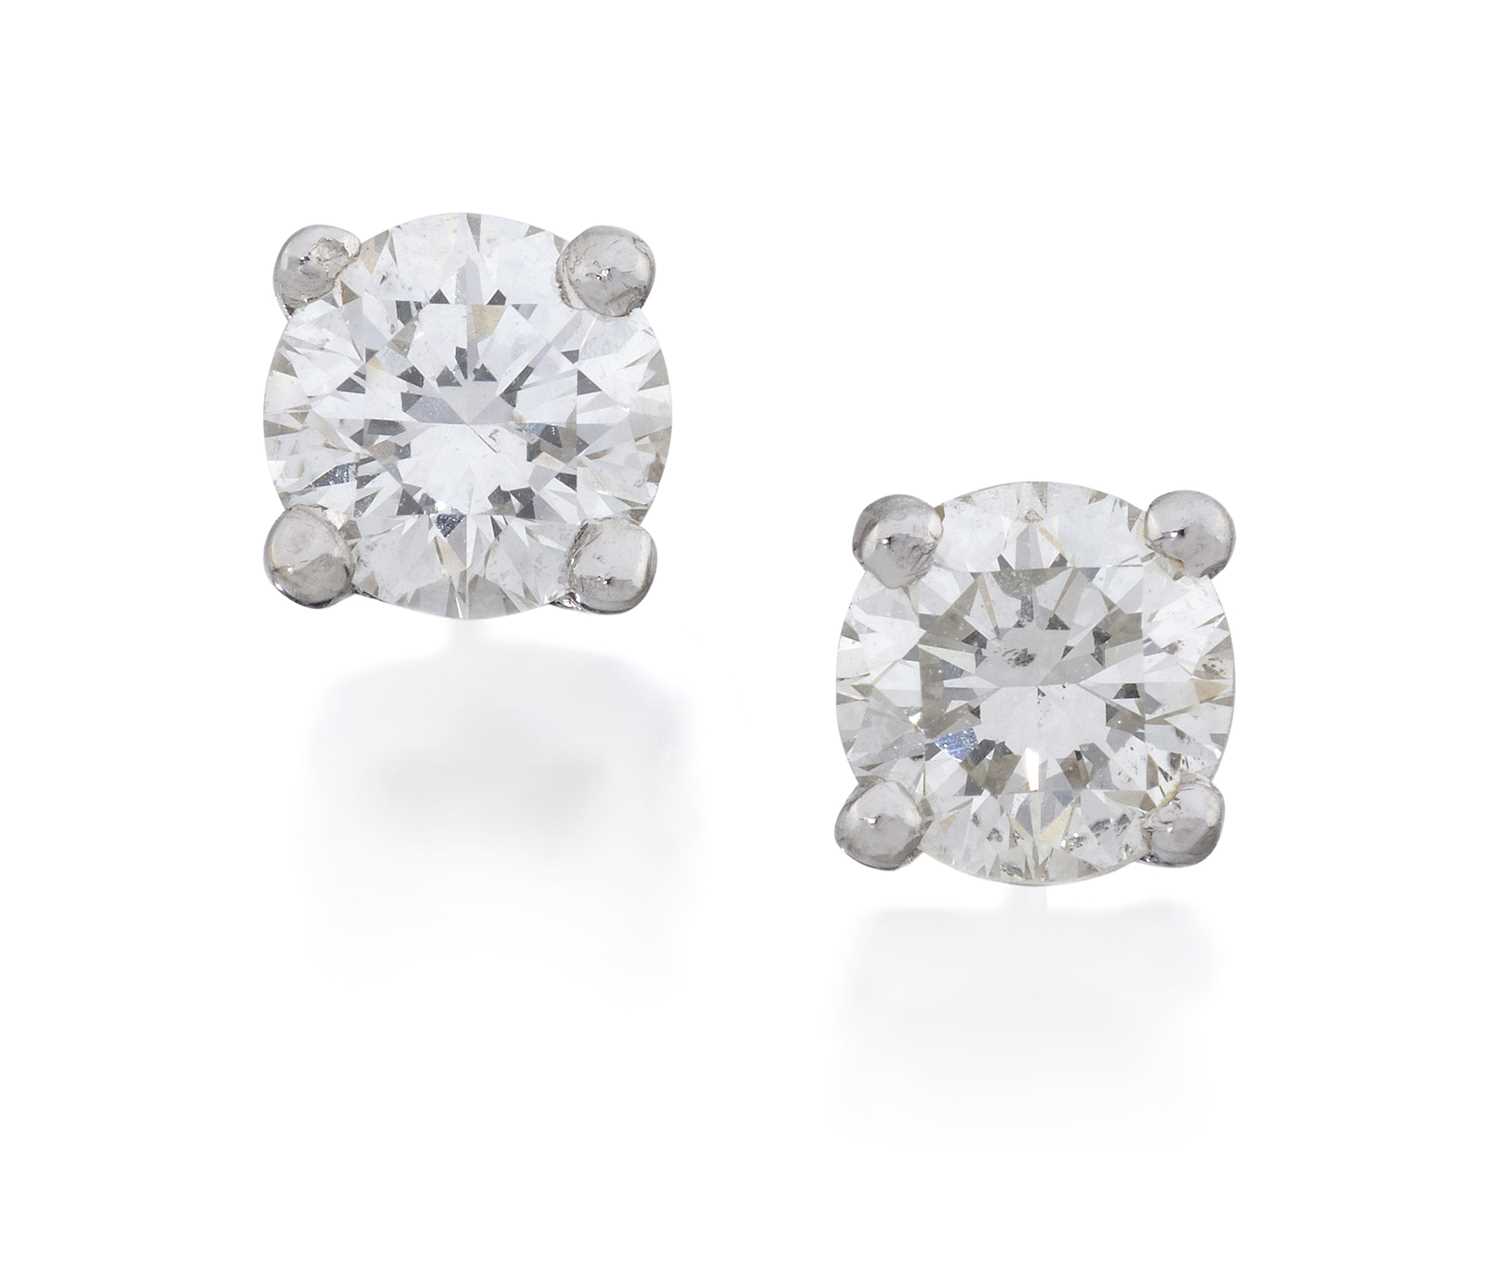 Lot 2164 - A Pair of Diamond Solitaire Earrings